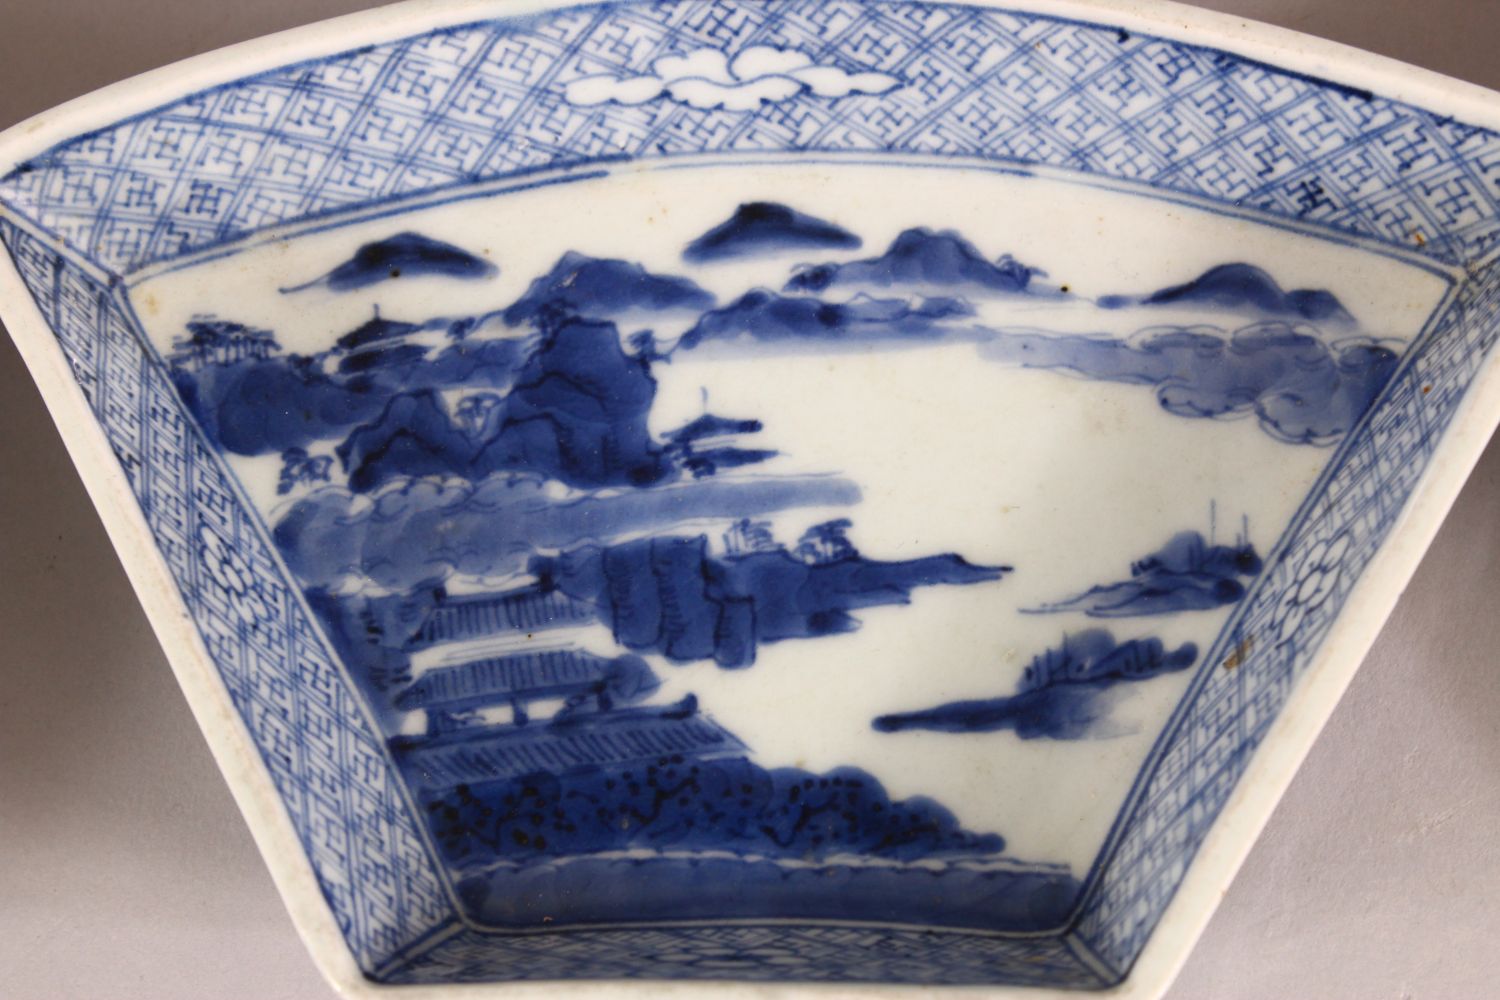 SET OF SIX 18TH / 19TH CENTURY BLUE & WHITE PORCELAIN SERVING DISHES - each decorated with landscape - Image 2 of 5